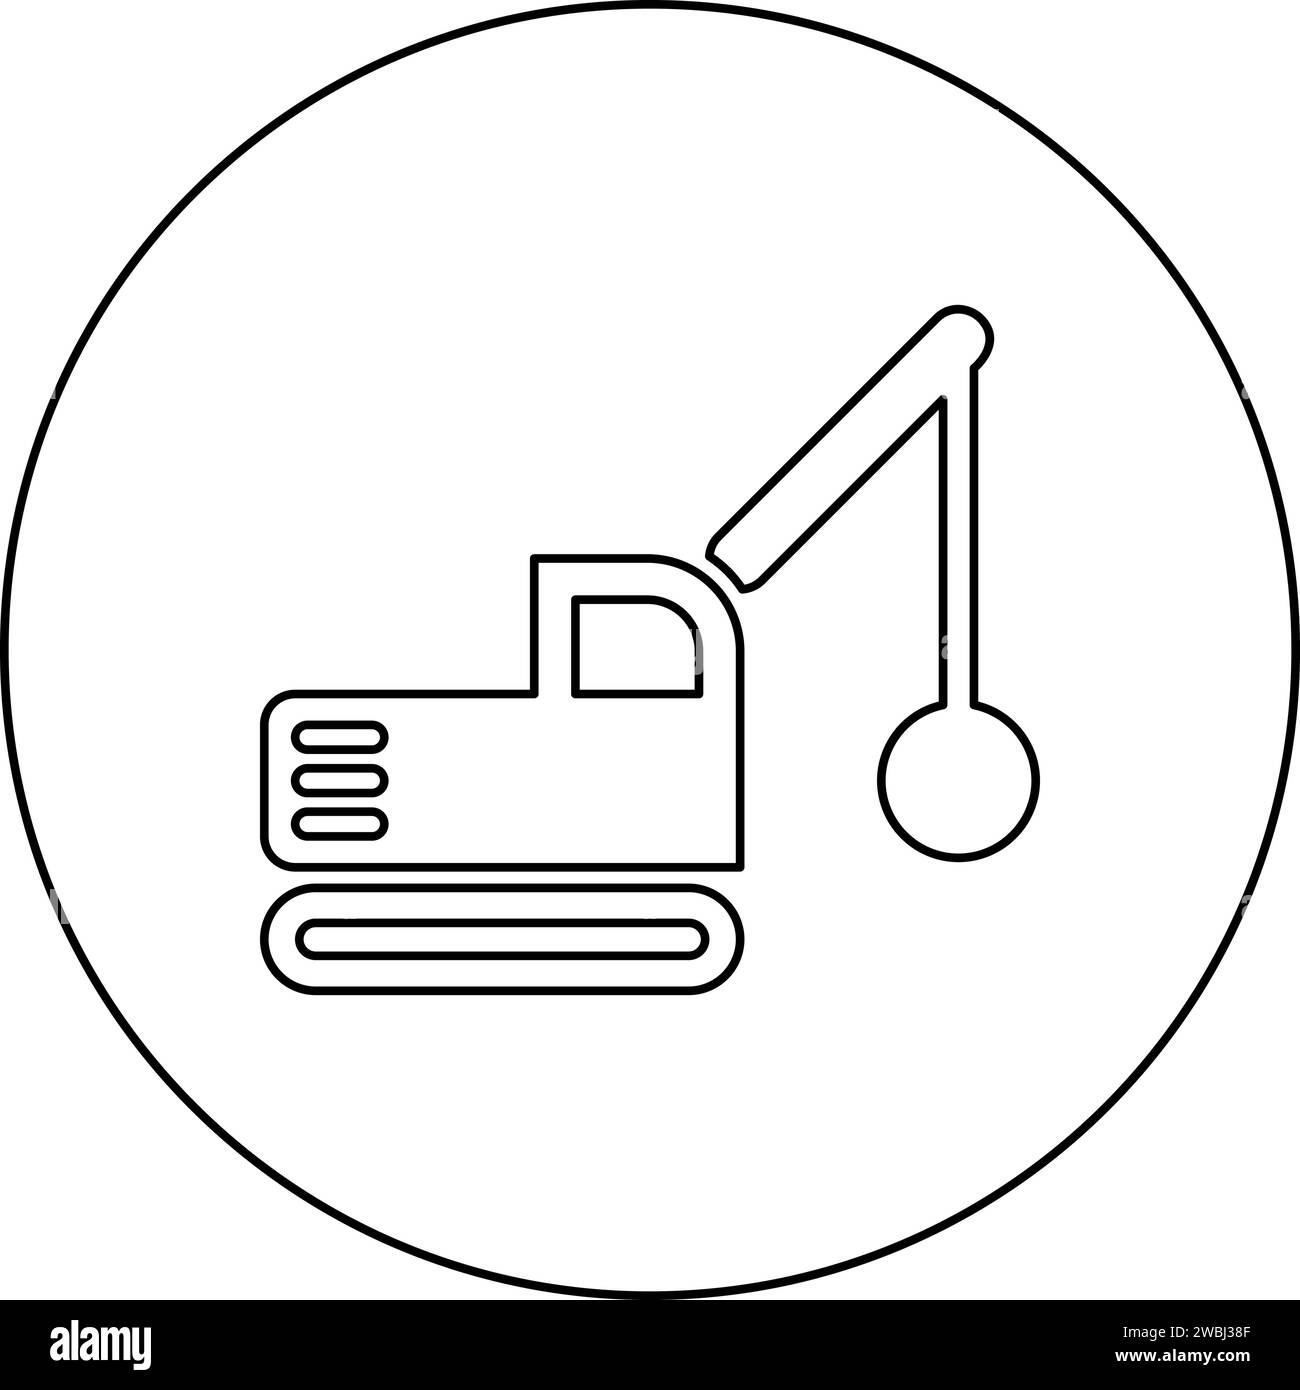 Sloopkraan building machine demolish wrecking ball crane truck icon in circle round black color vector illustration image outline contour line thin Stock Vector